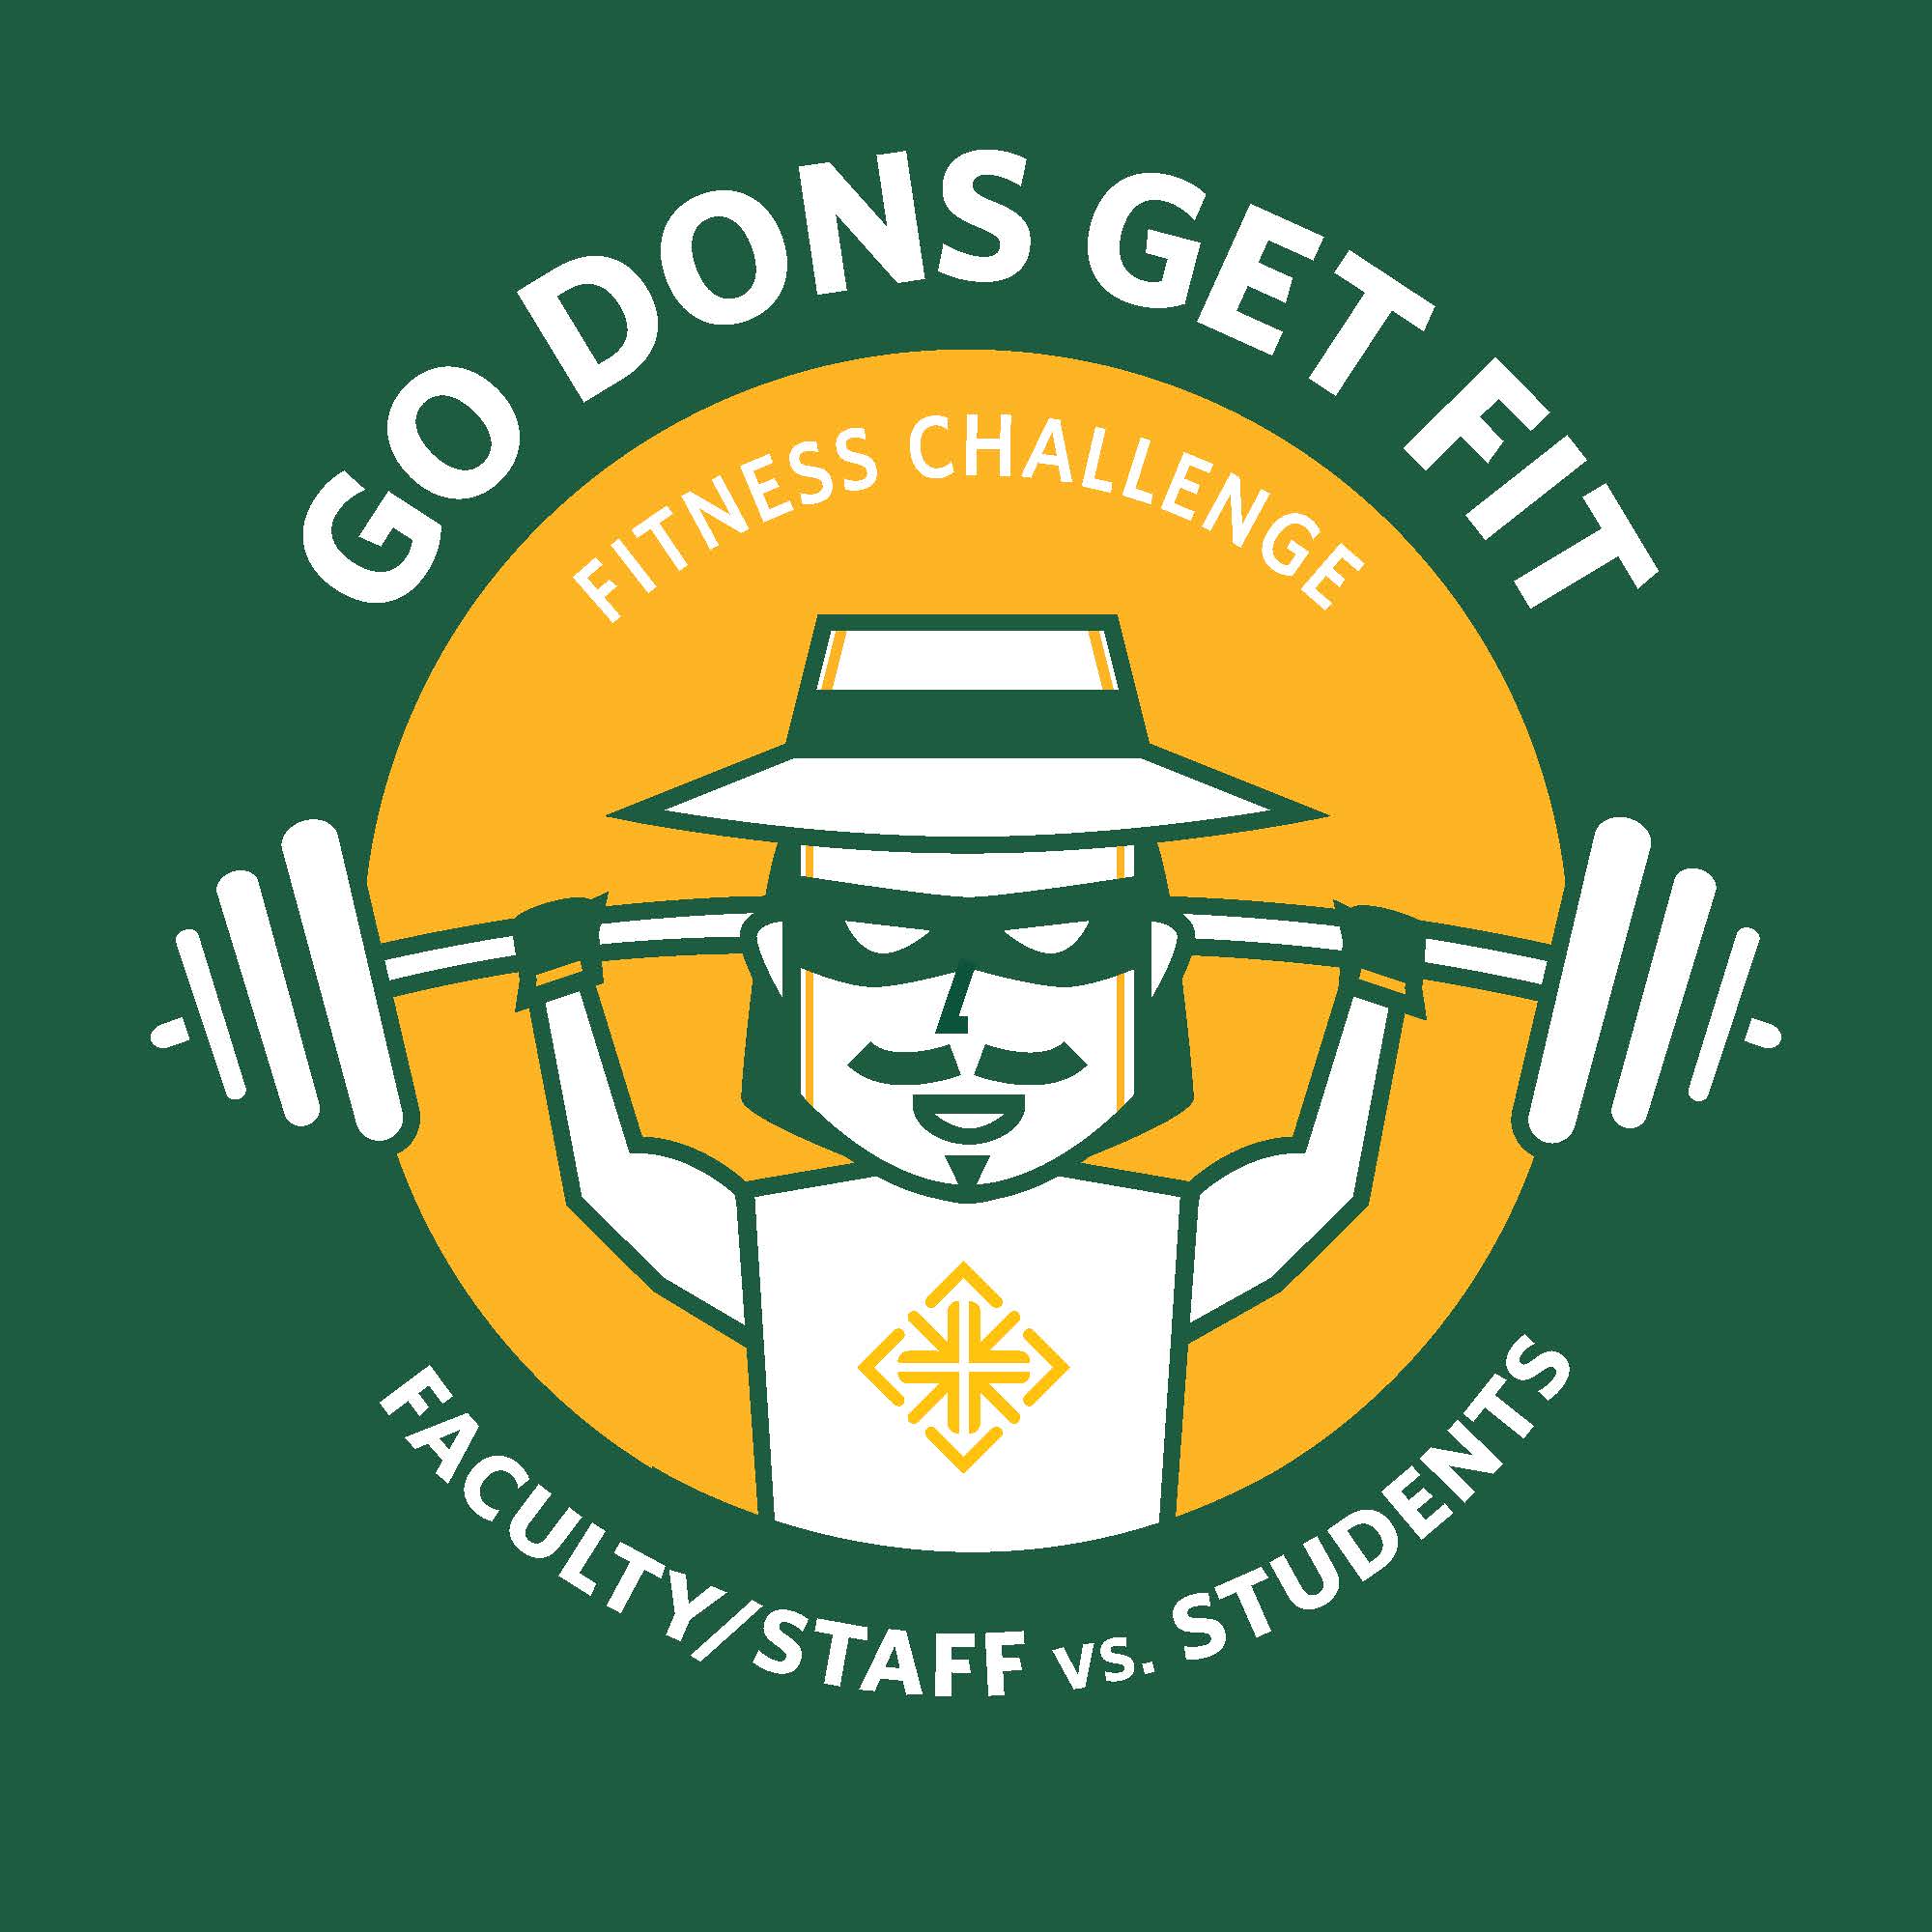 Go Dons Get Fit